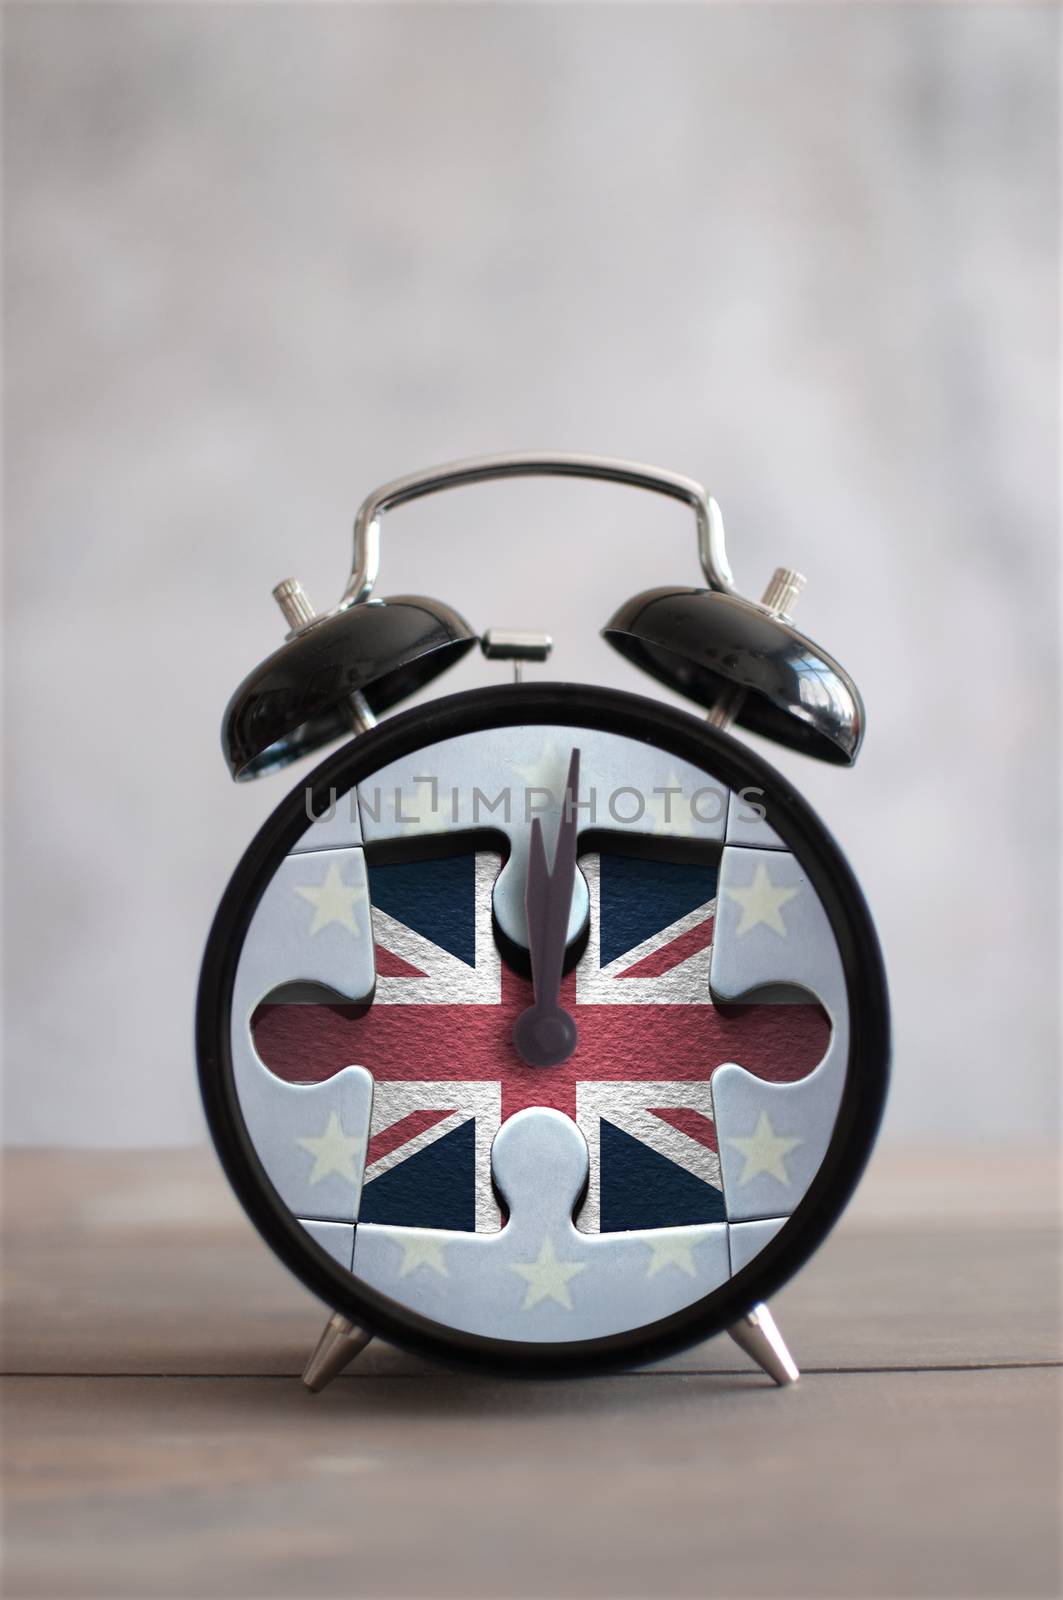 Clock with missing piece from a jigsaw piece british flag